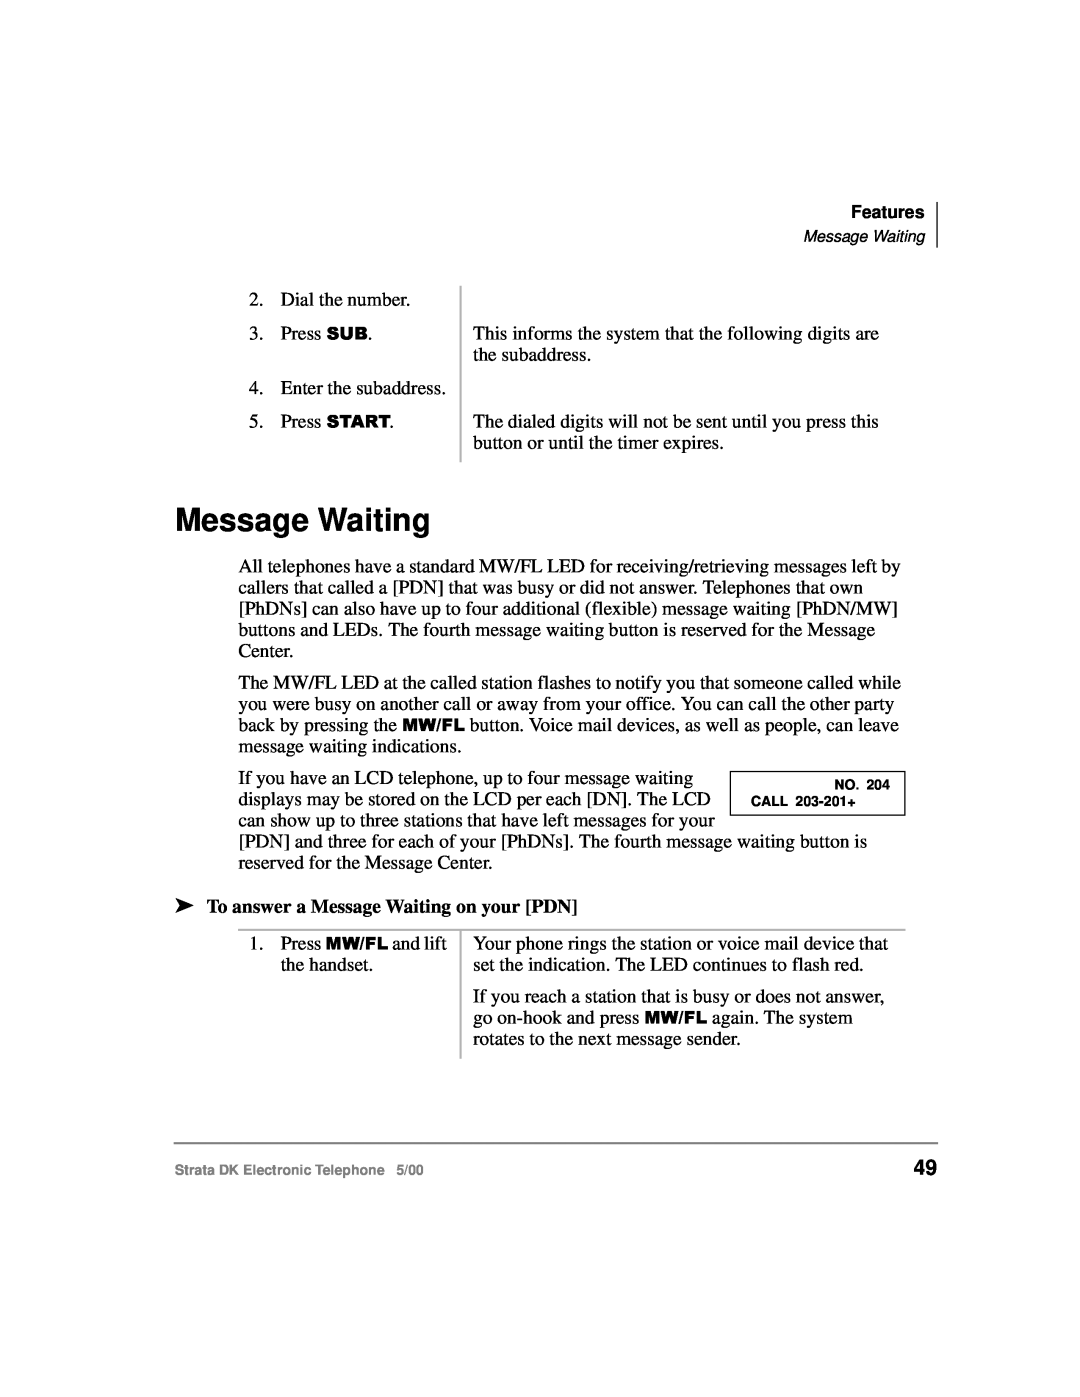 Toshiba Strata DK manual Message Waiting, If you have an LCD telephone, up to four message waiting 